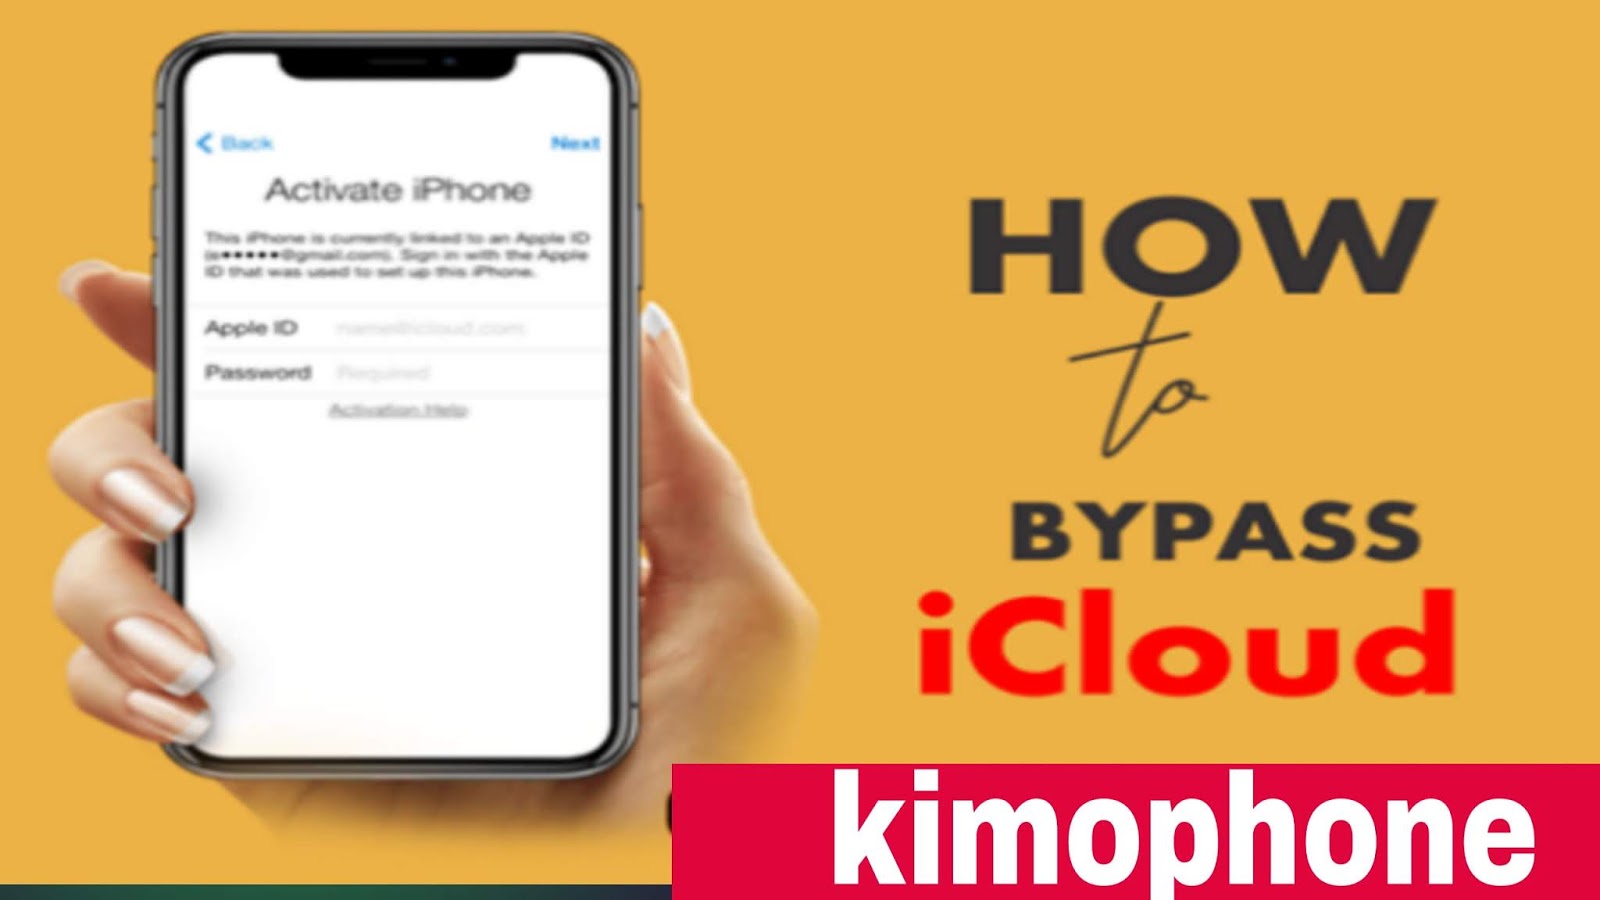 icloud activation bypass tool version 1.4 reddit